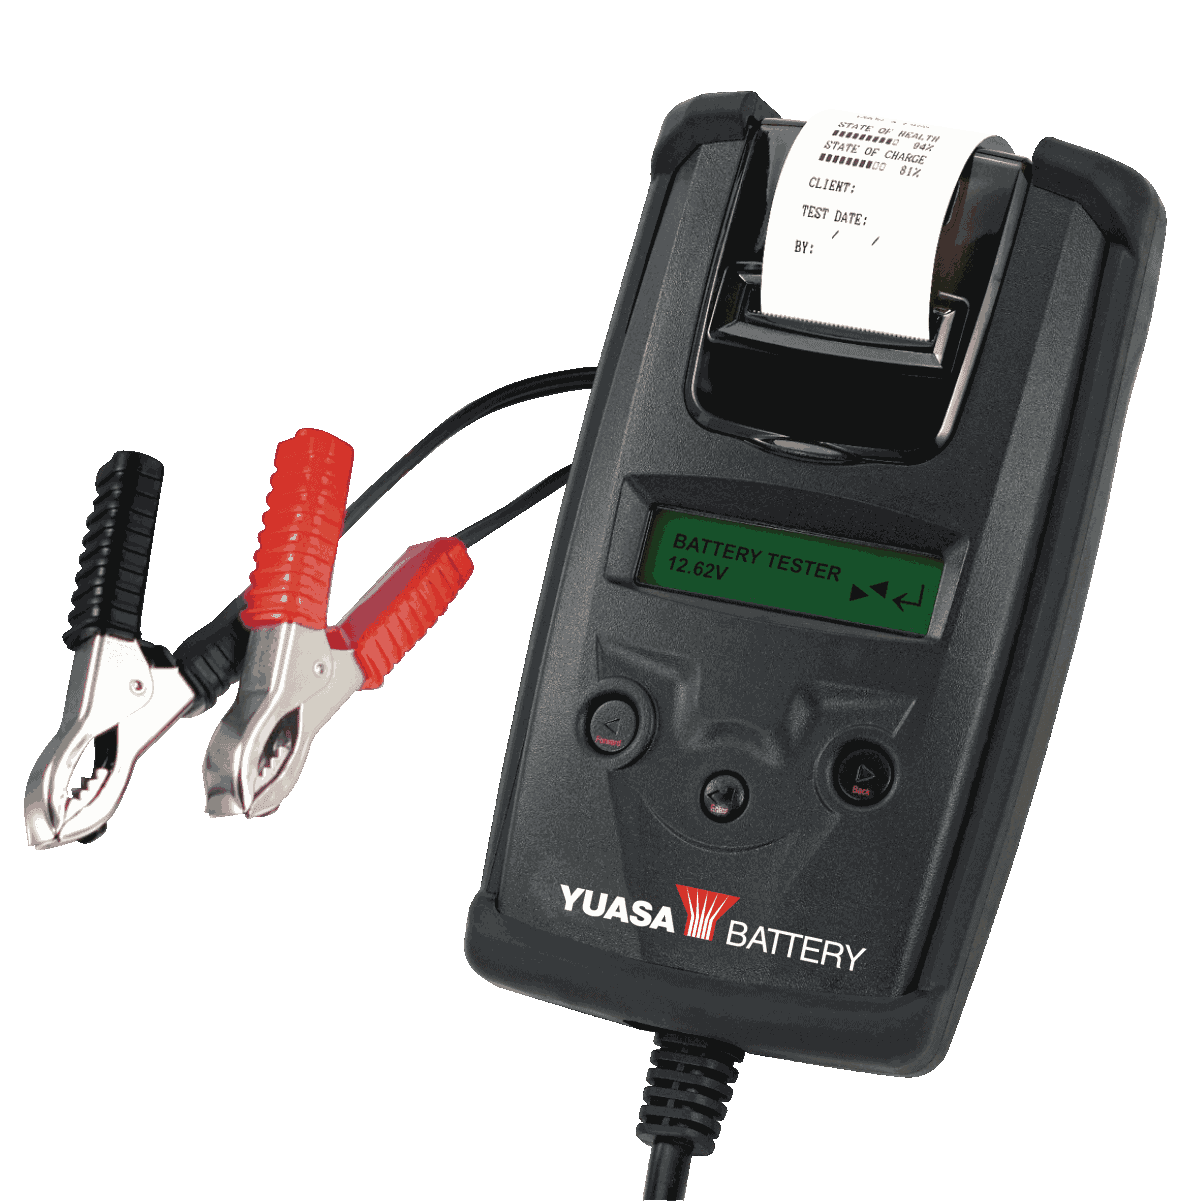 Digital battery tester with printer